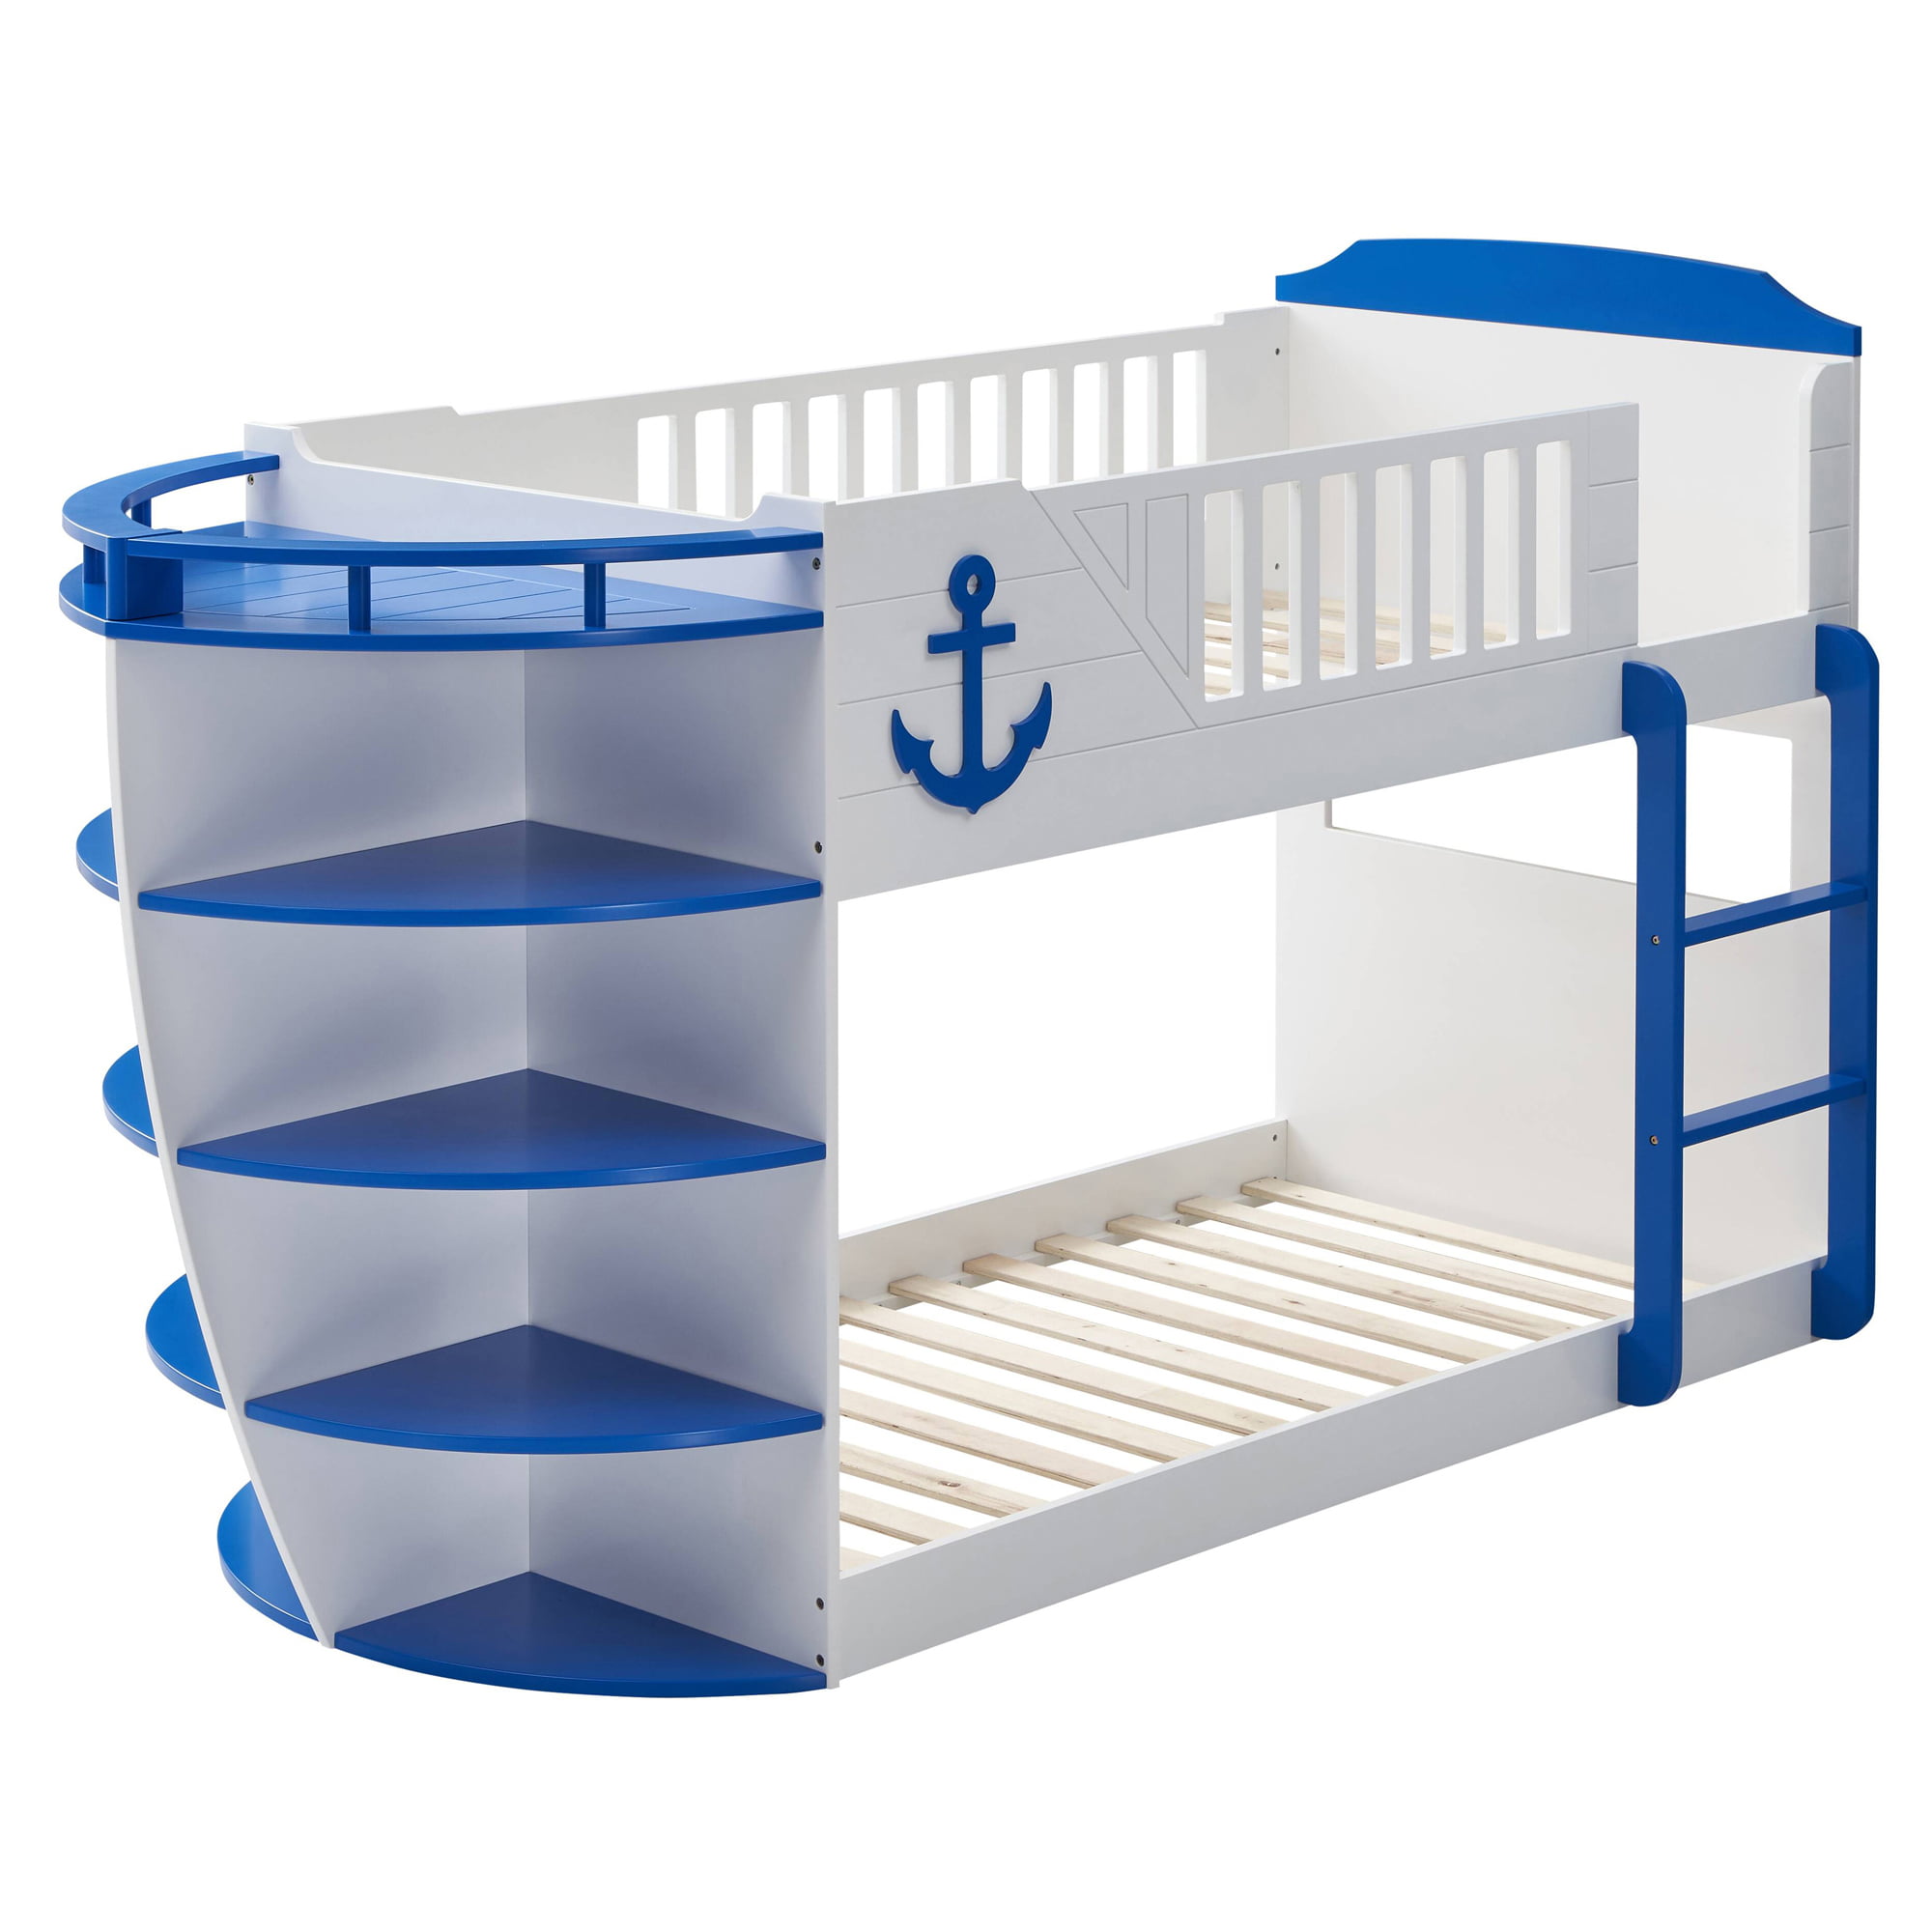 Picture of Acme Furniture BD00577 100 x 41 x 57 in. Neptune Bunk Bed with Storage Shelves, Sky Blue - Twin Size